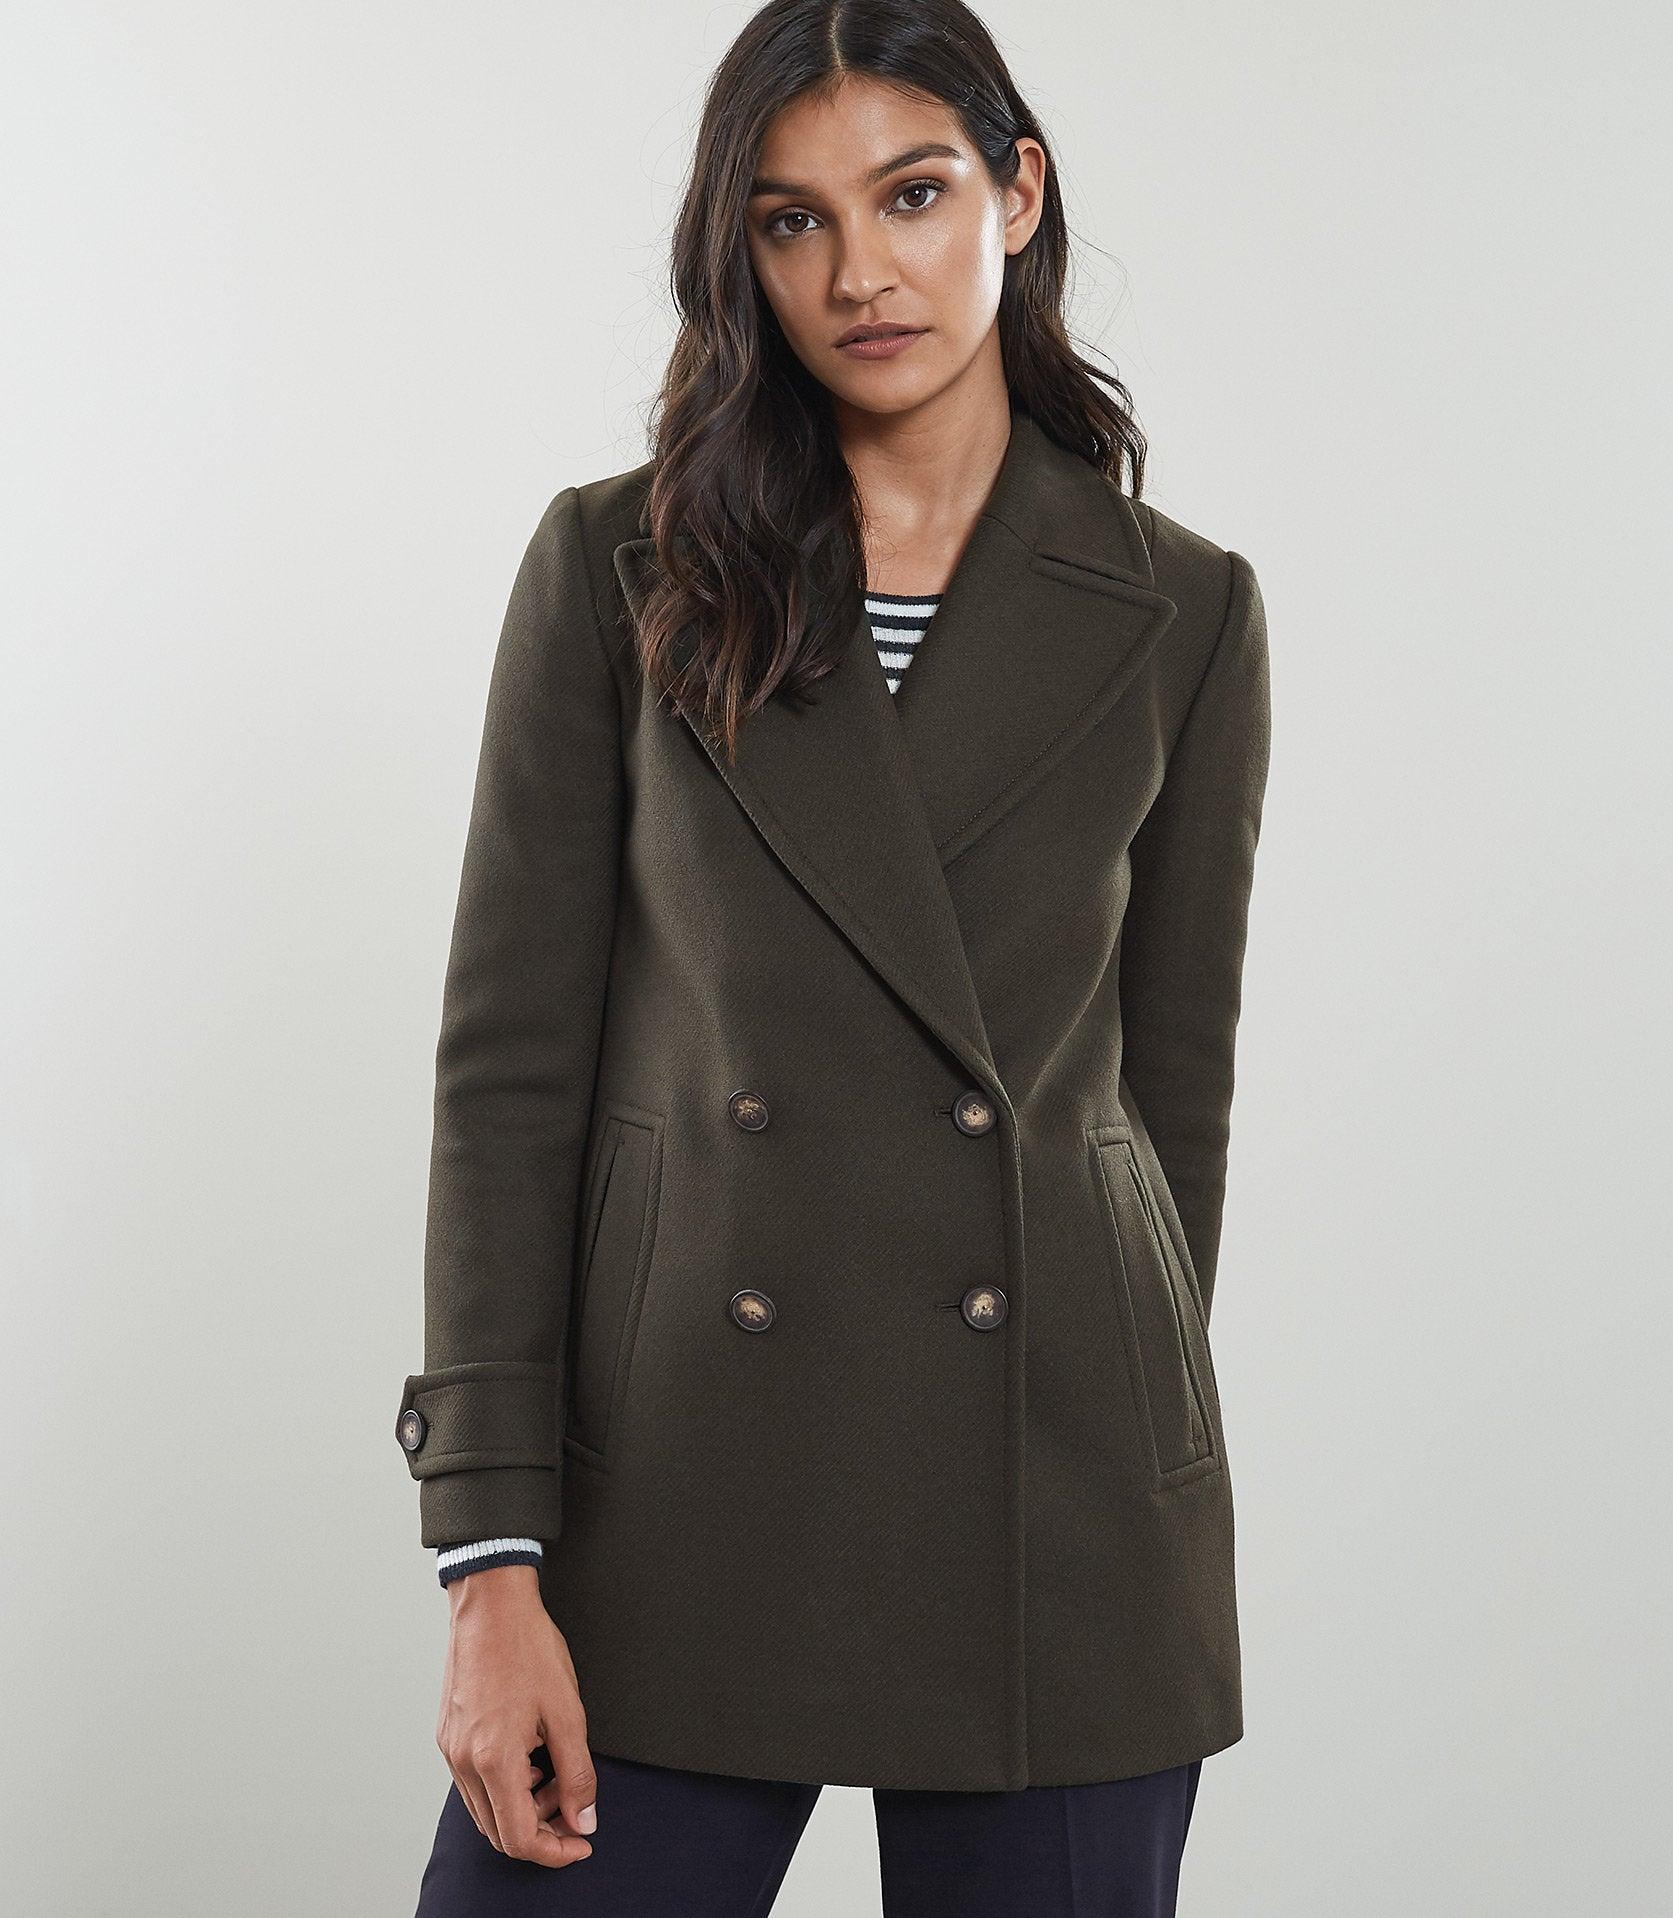 Reiss Double Breasted Peacoat - Lyst